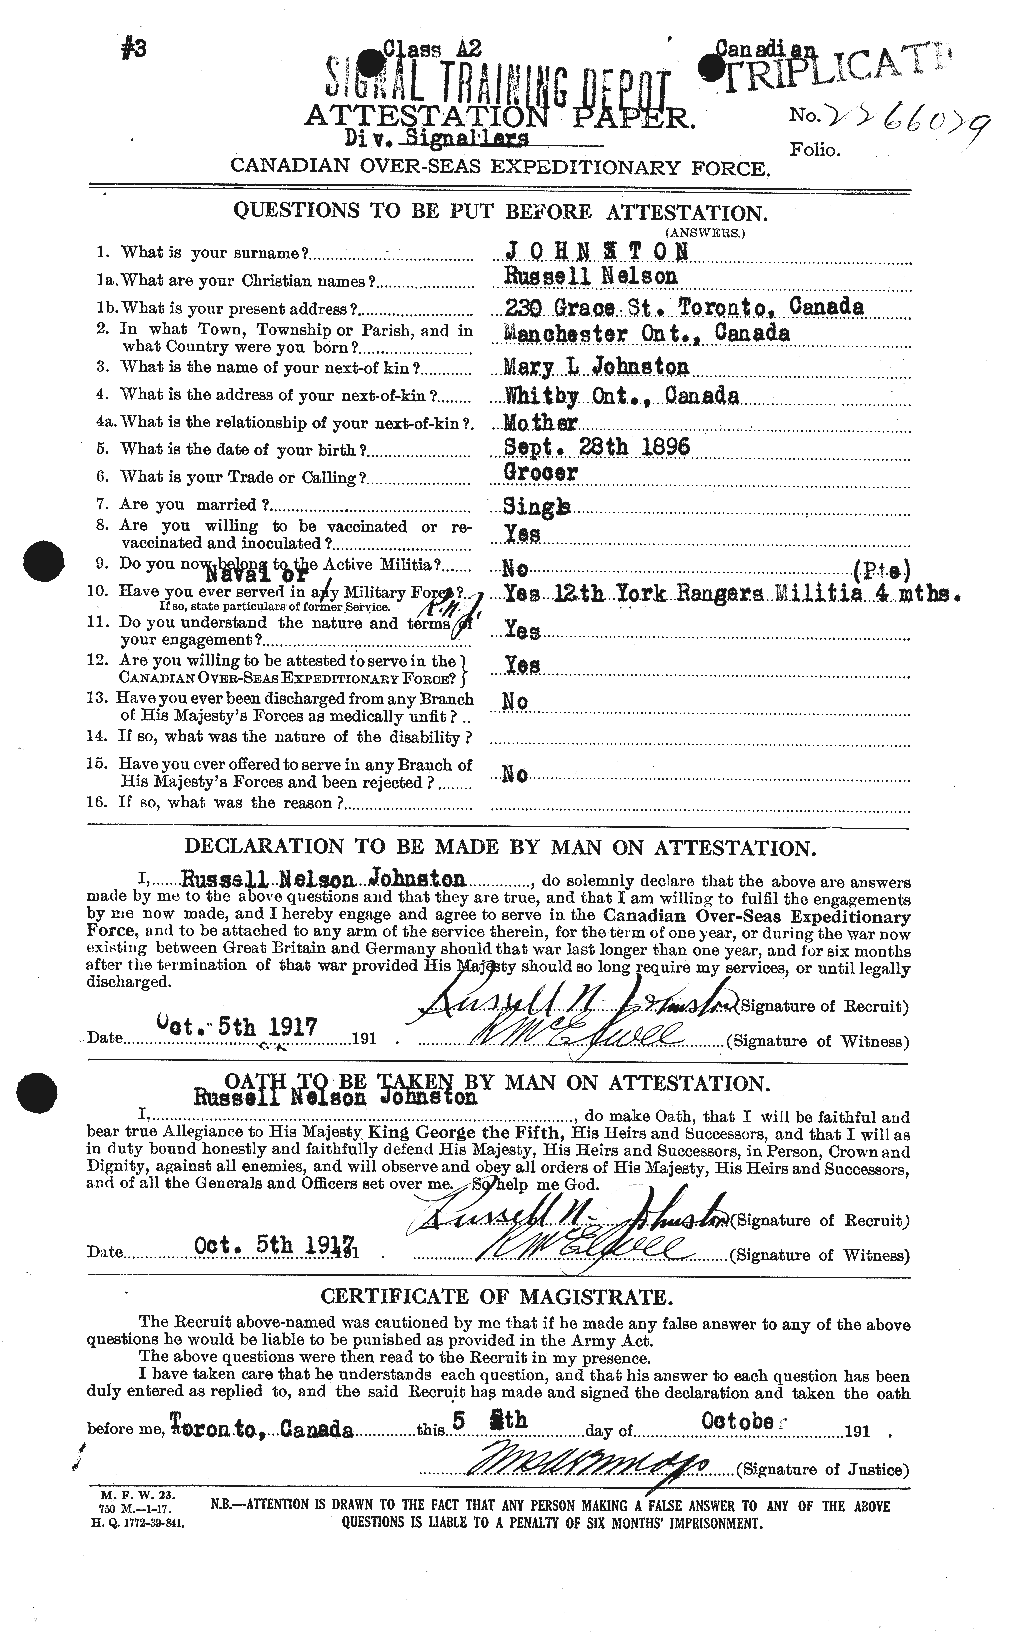 Personnel Records of the First World War - CEF 427074a